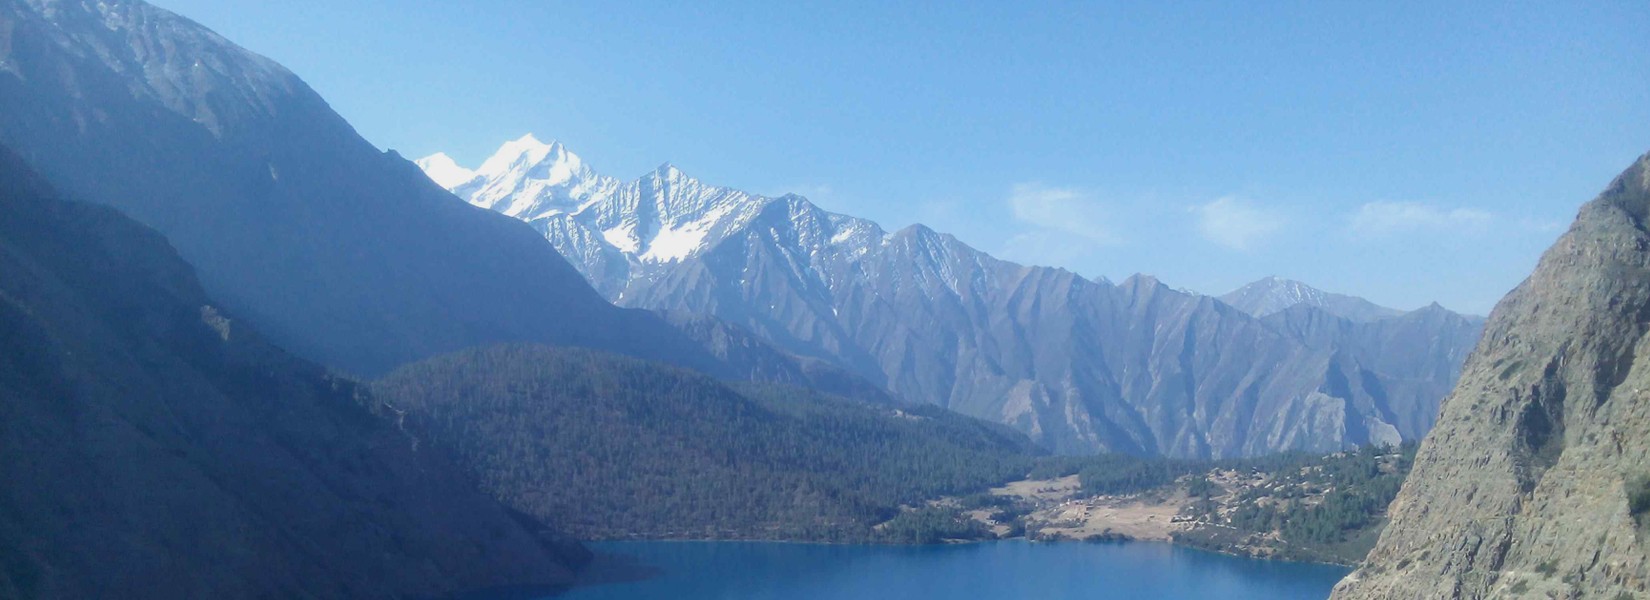 6 Restricted Area Trekking In Nepal where You can feel the Adventure Thrill